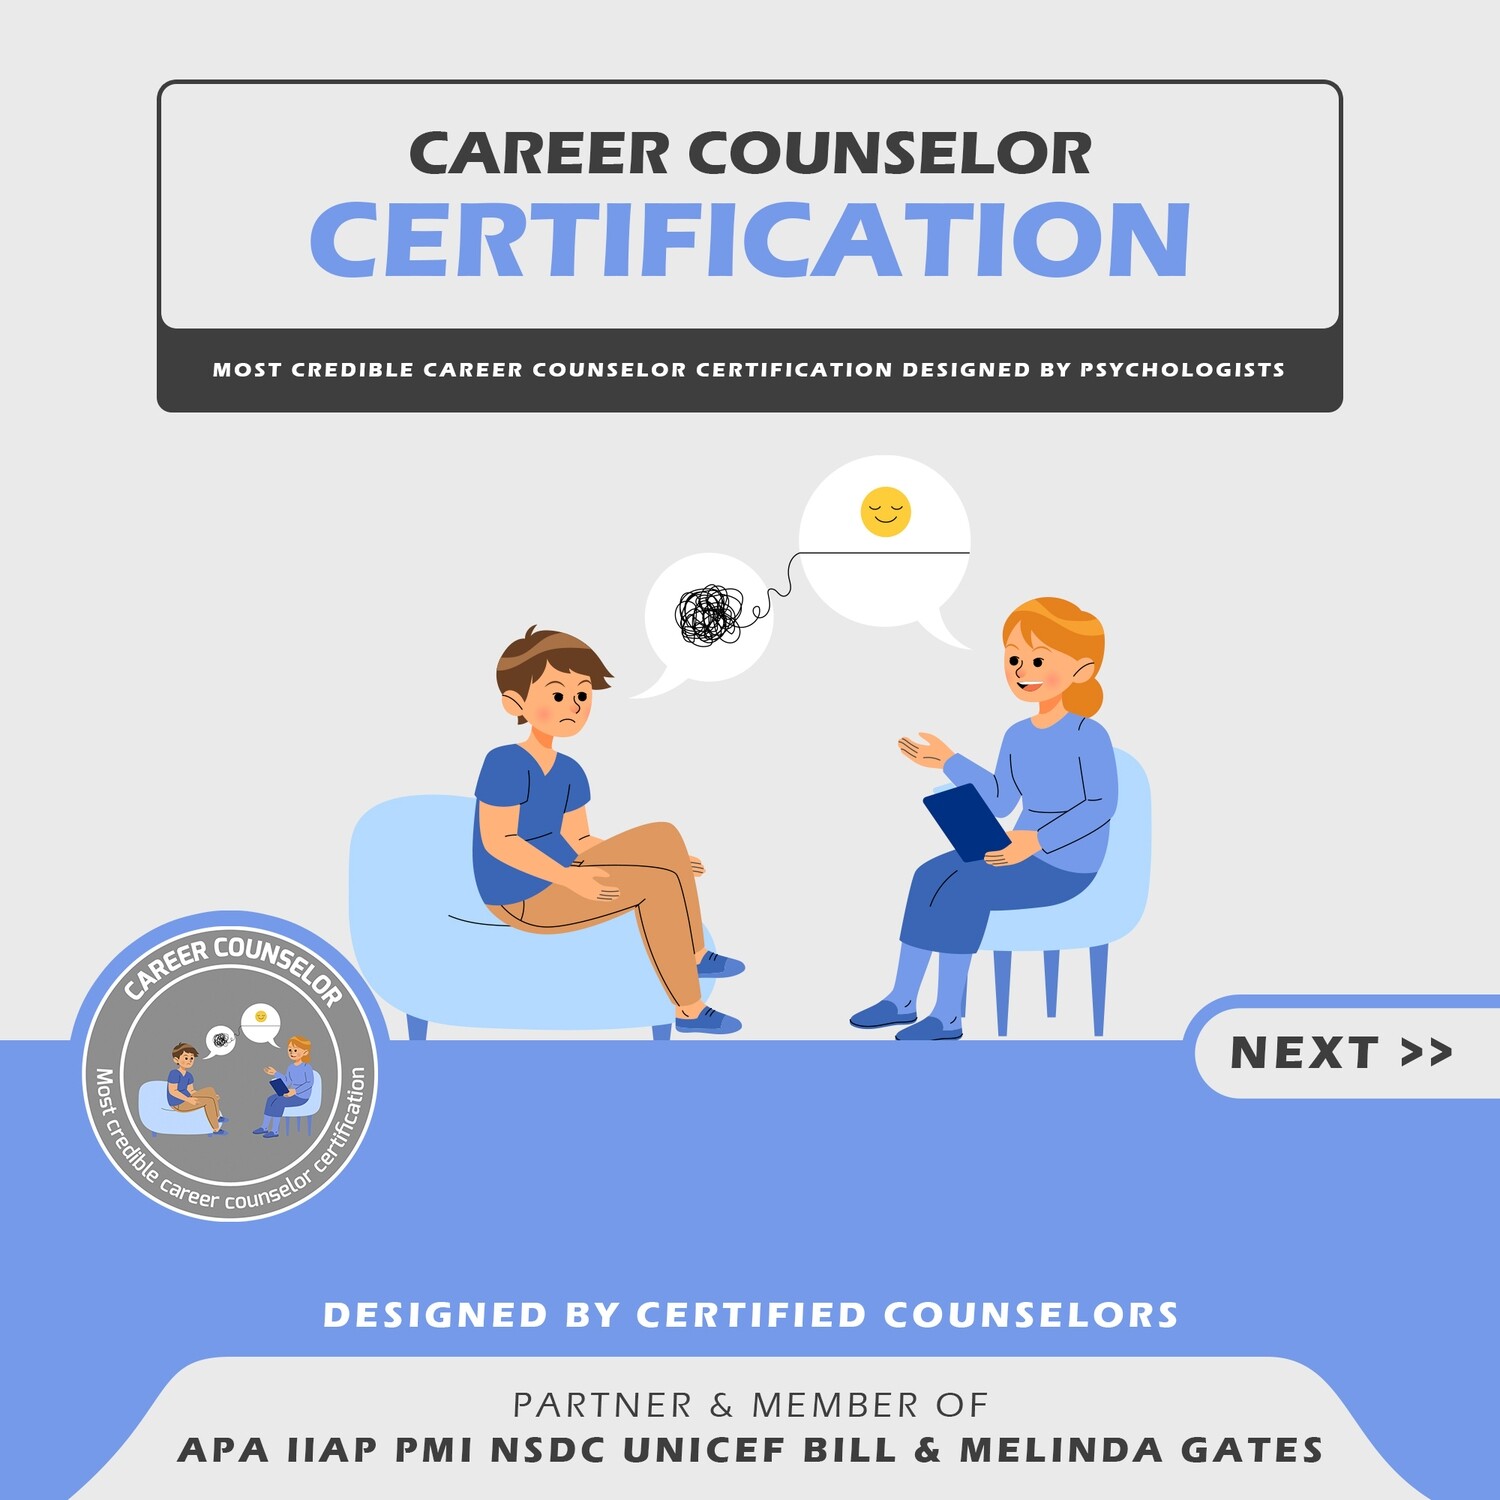 Career Counselor Certification